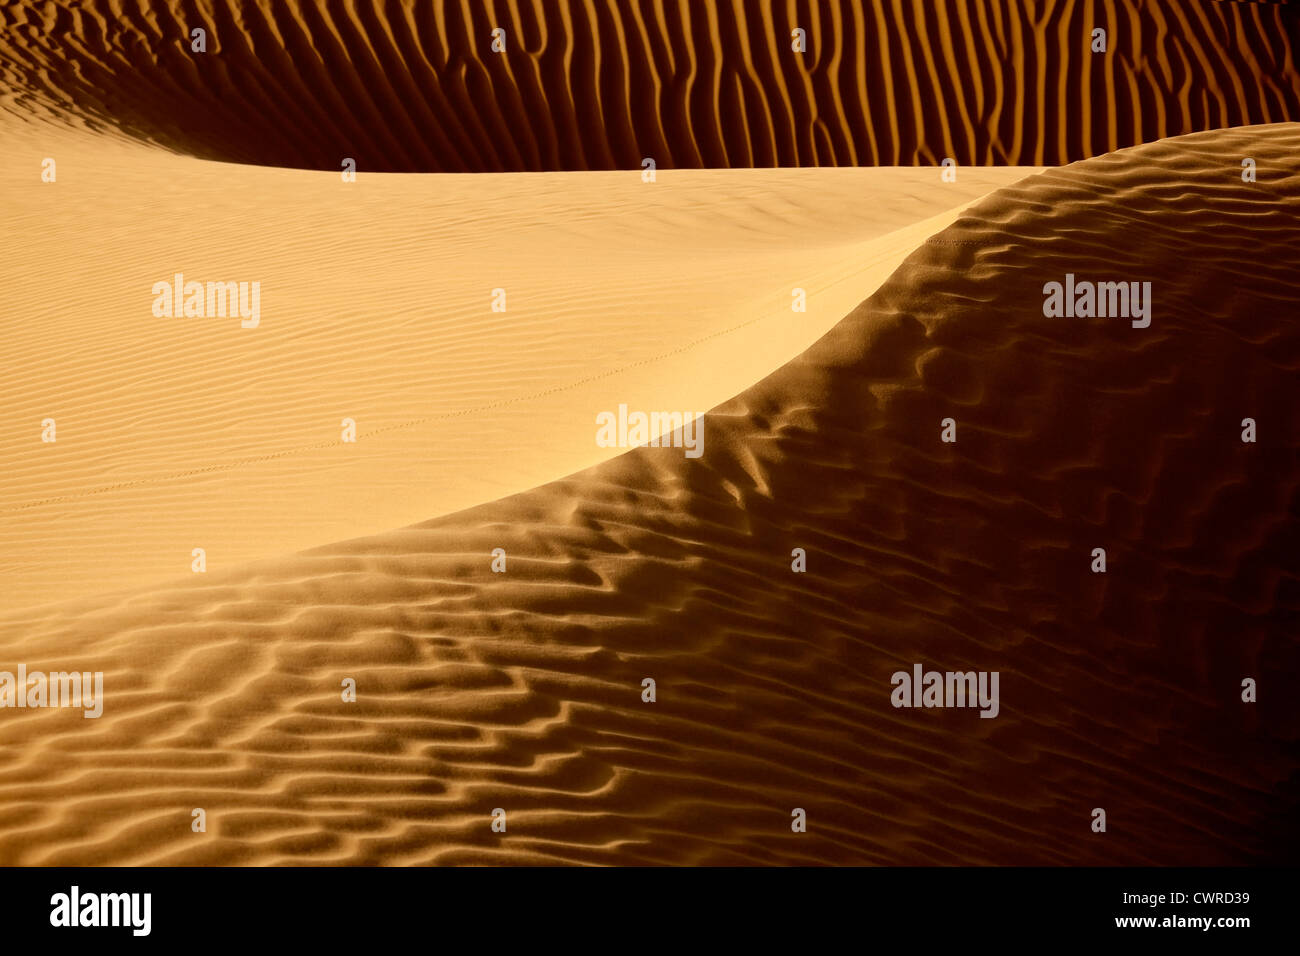 Picture of sand dunes in the Sahara desert of Morocco. Stock Photo